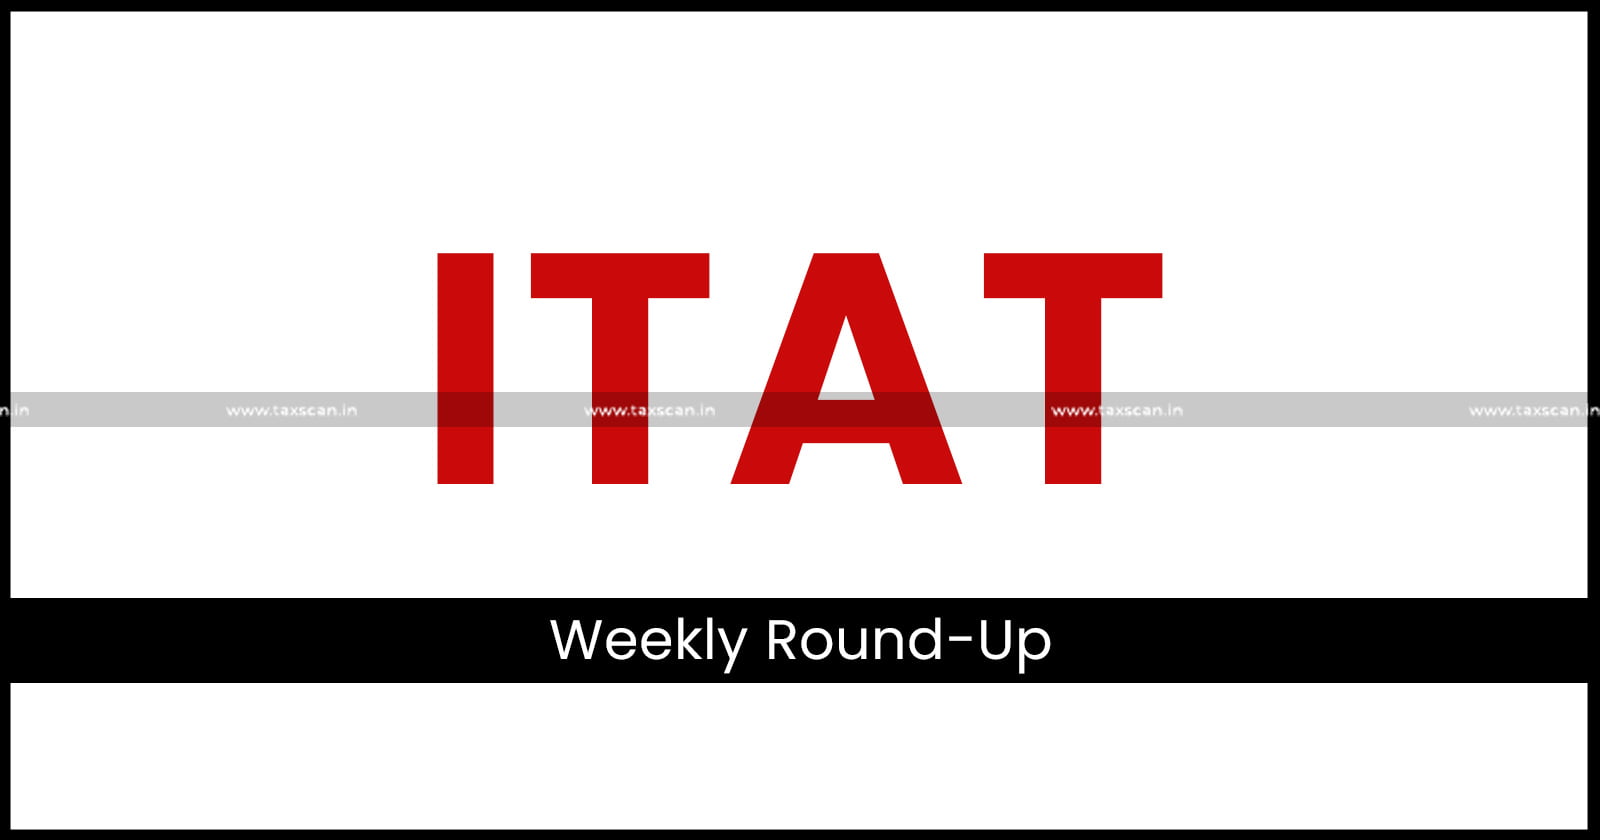 ITAT - ITAT Weekly Round-Up - Weekly Round Up - taxscan